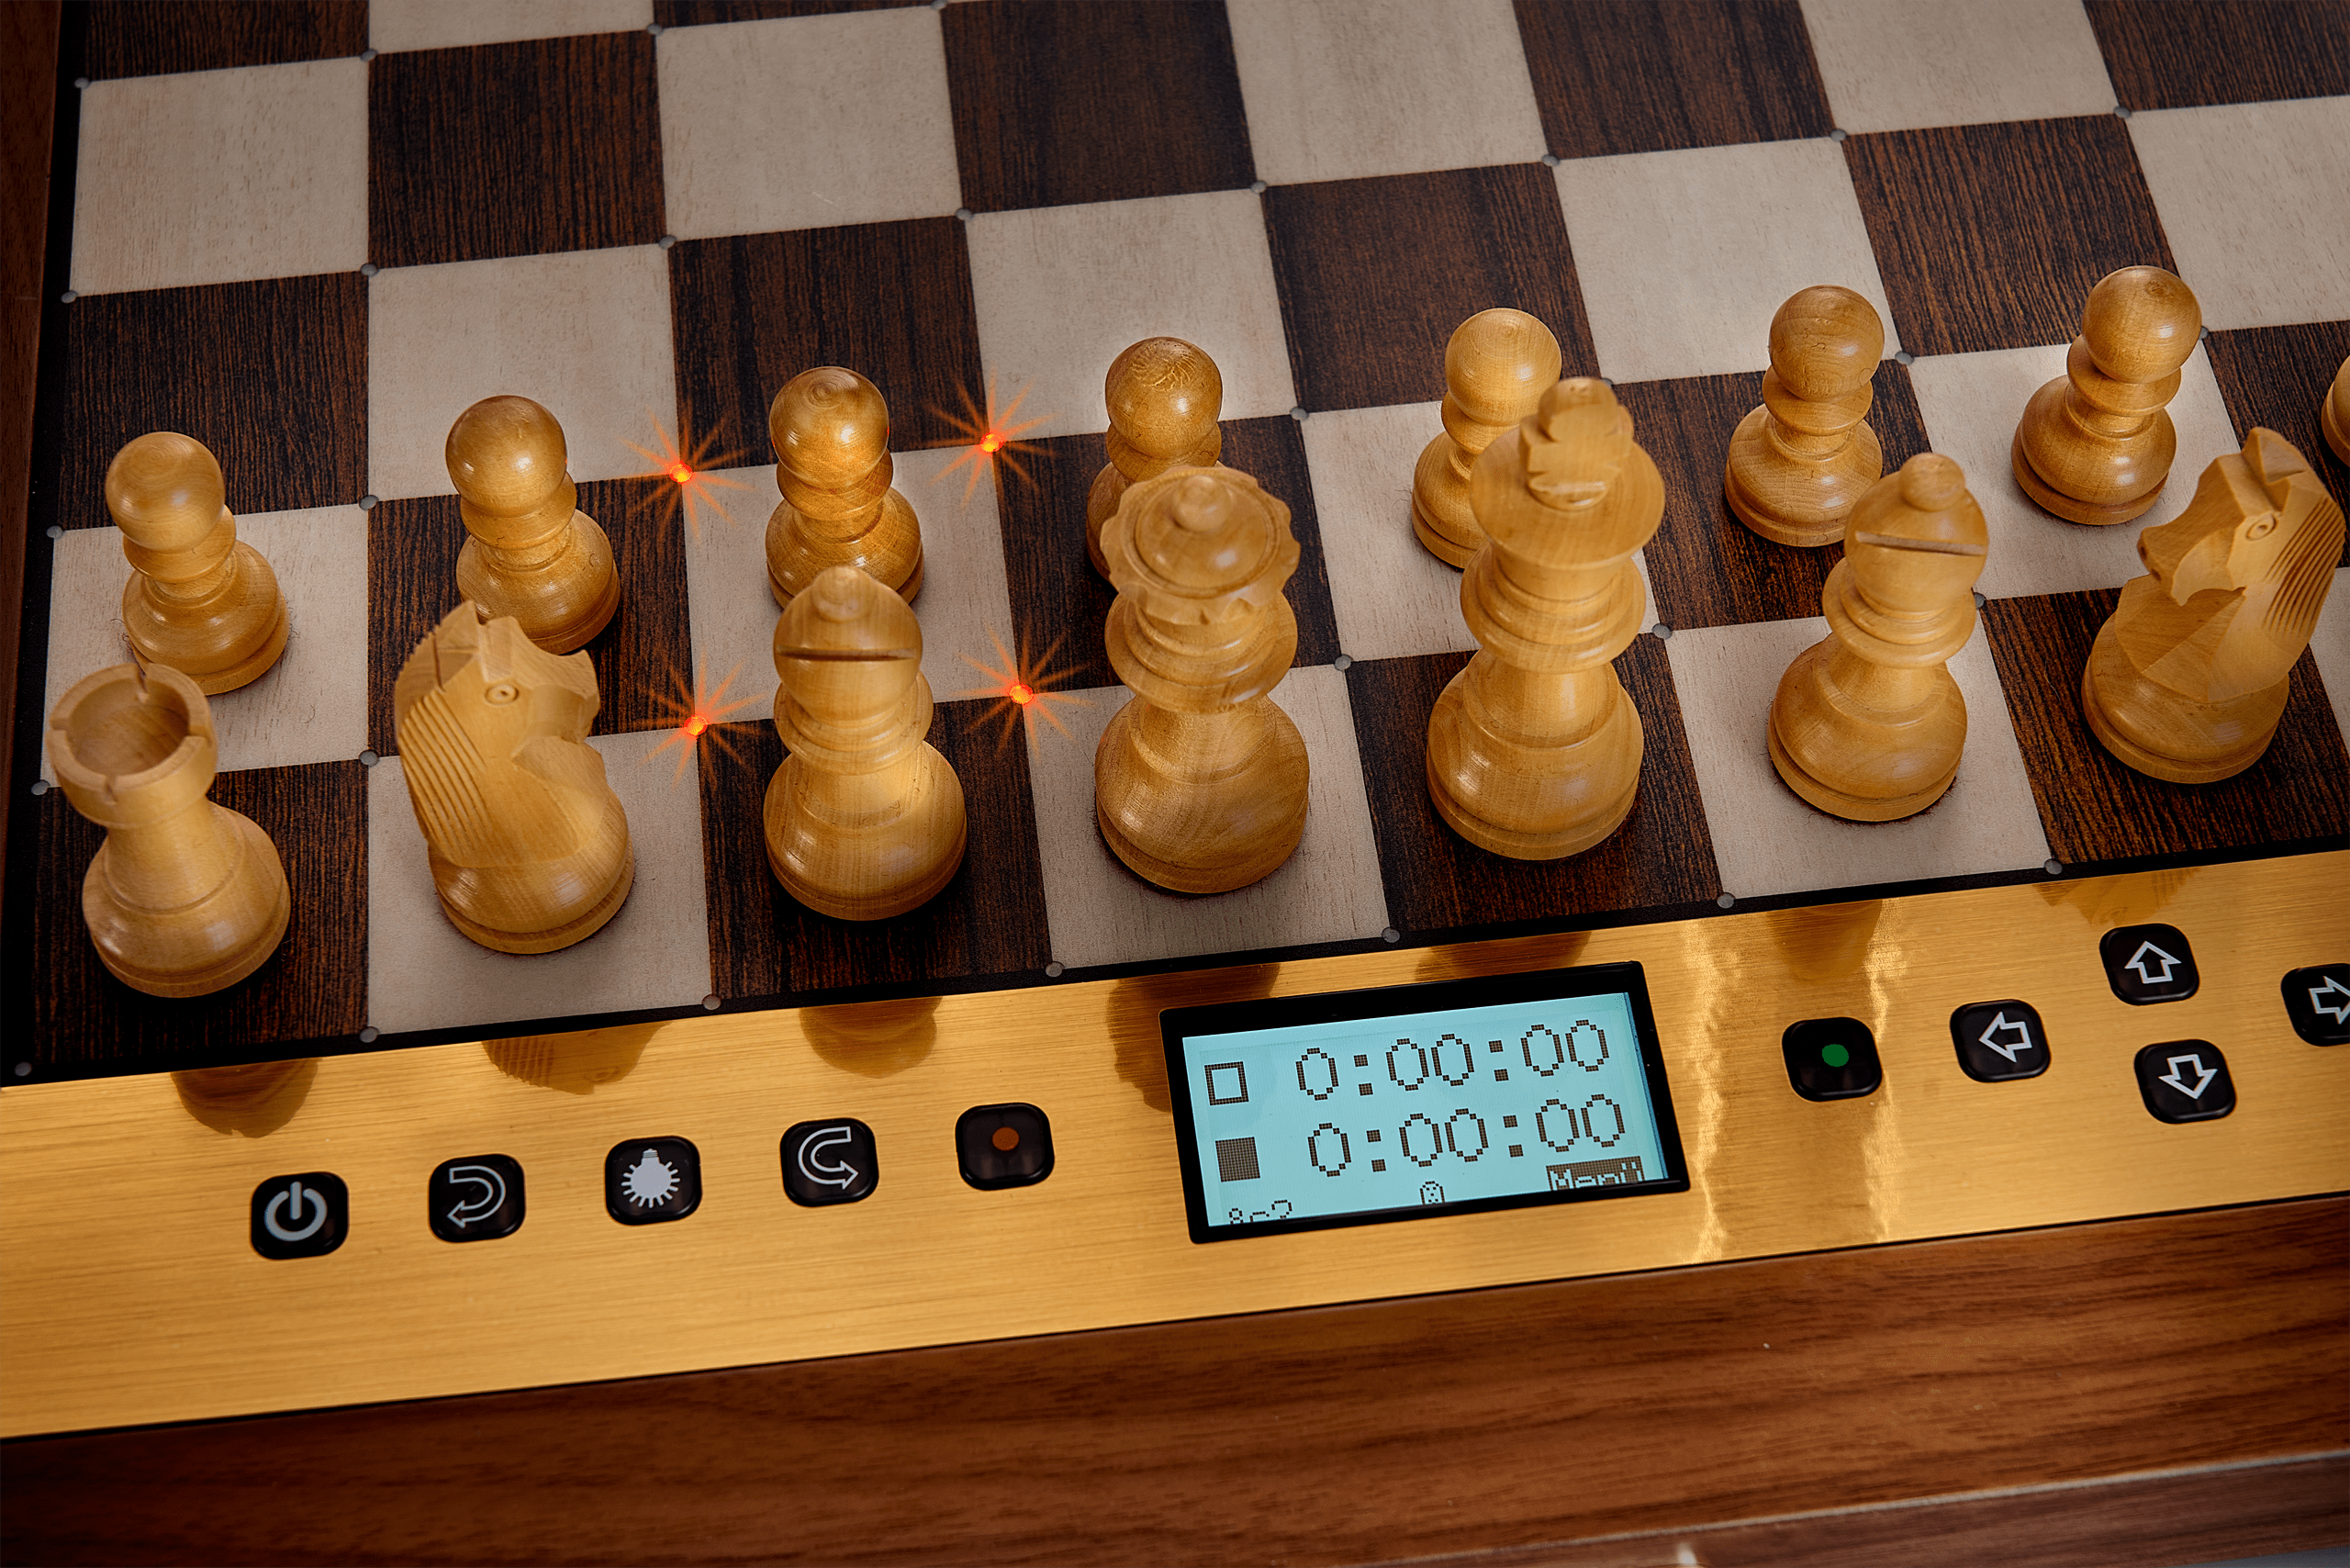 Millennium Chess Computer - The King Performance - Chess Computer - Chess-House